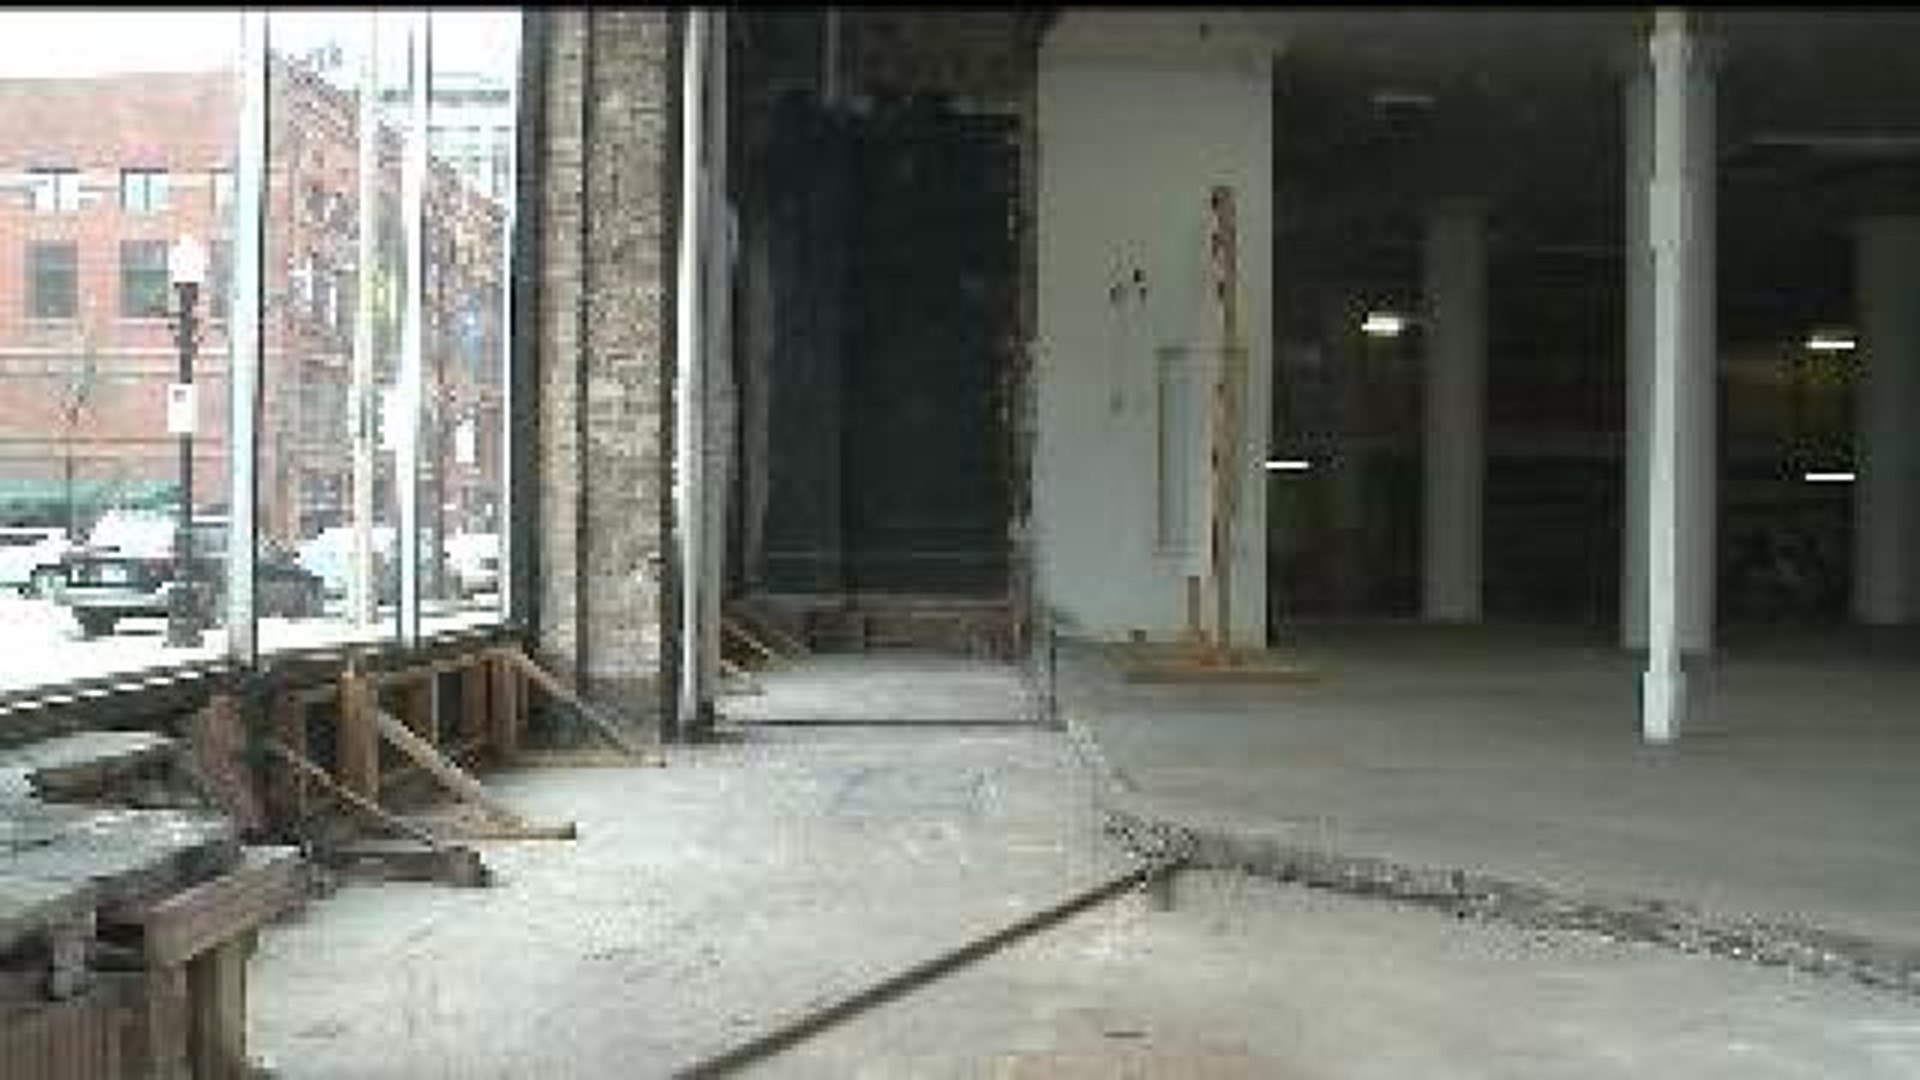 Big changes discussed for downtown Davenport